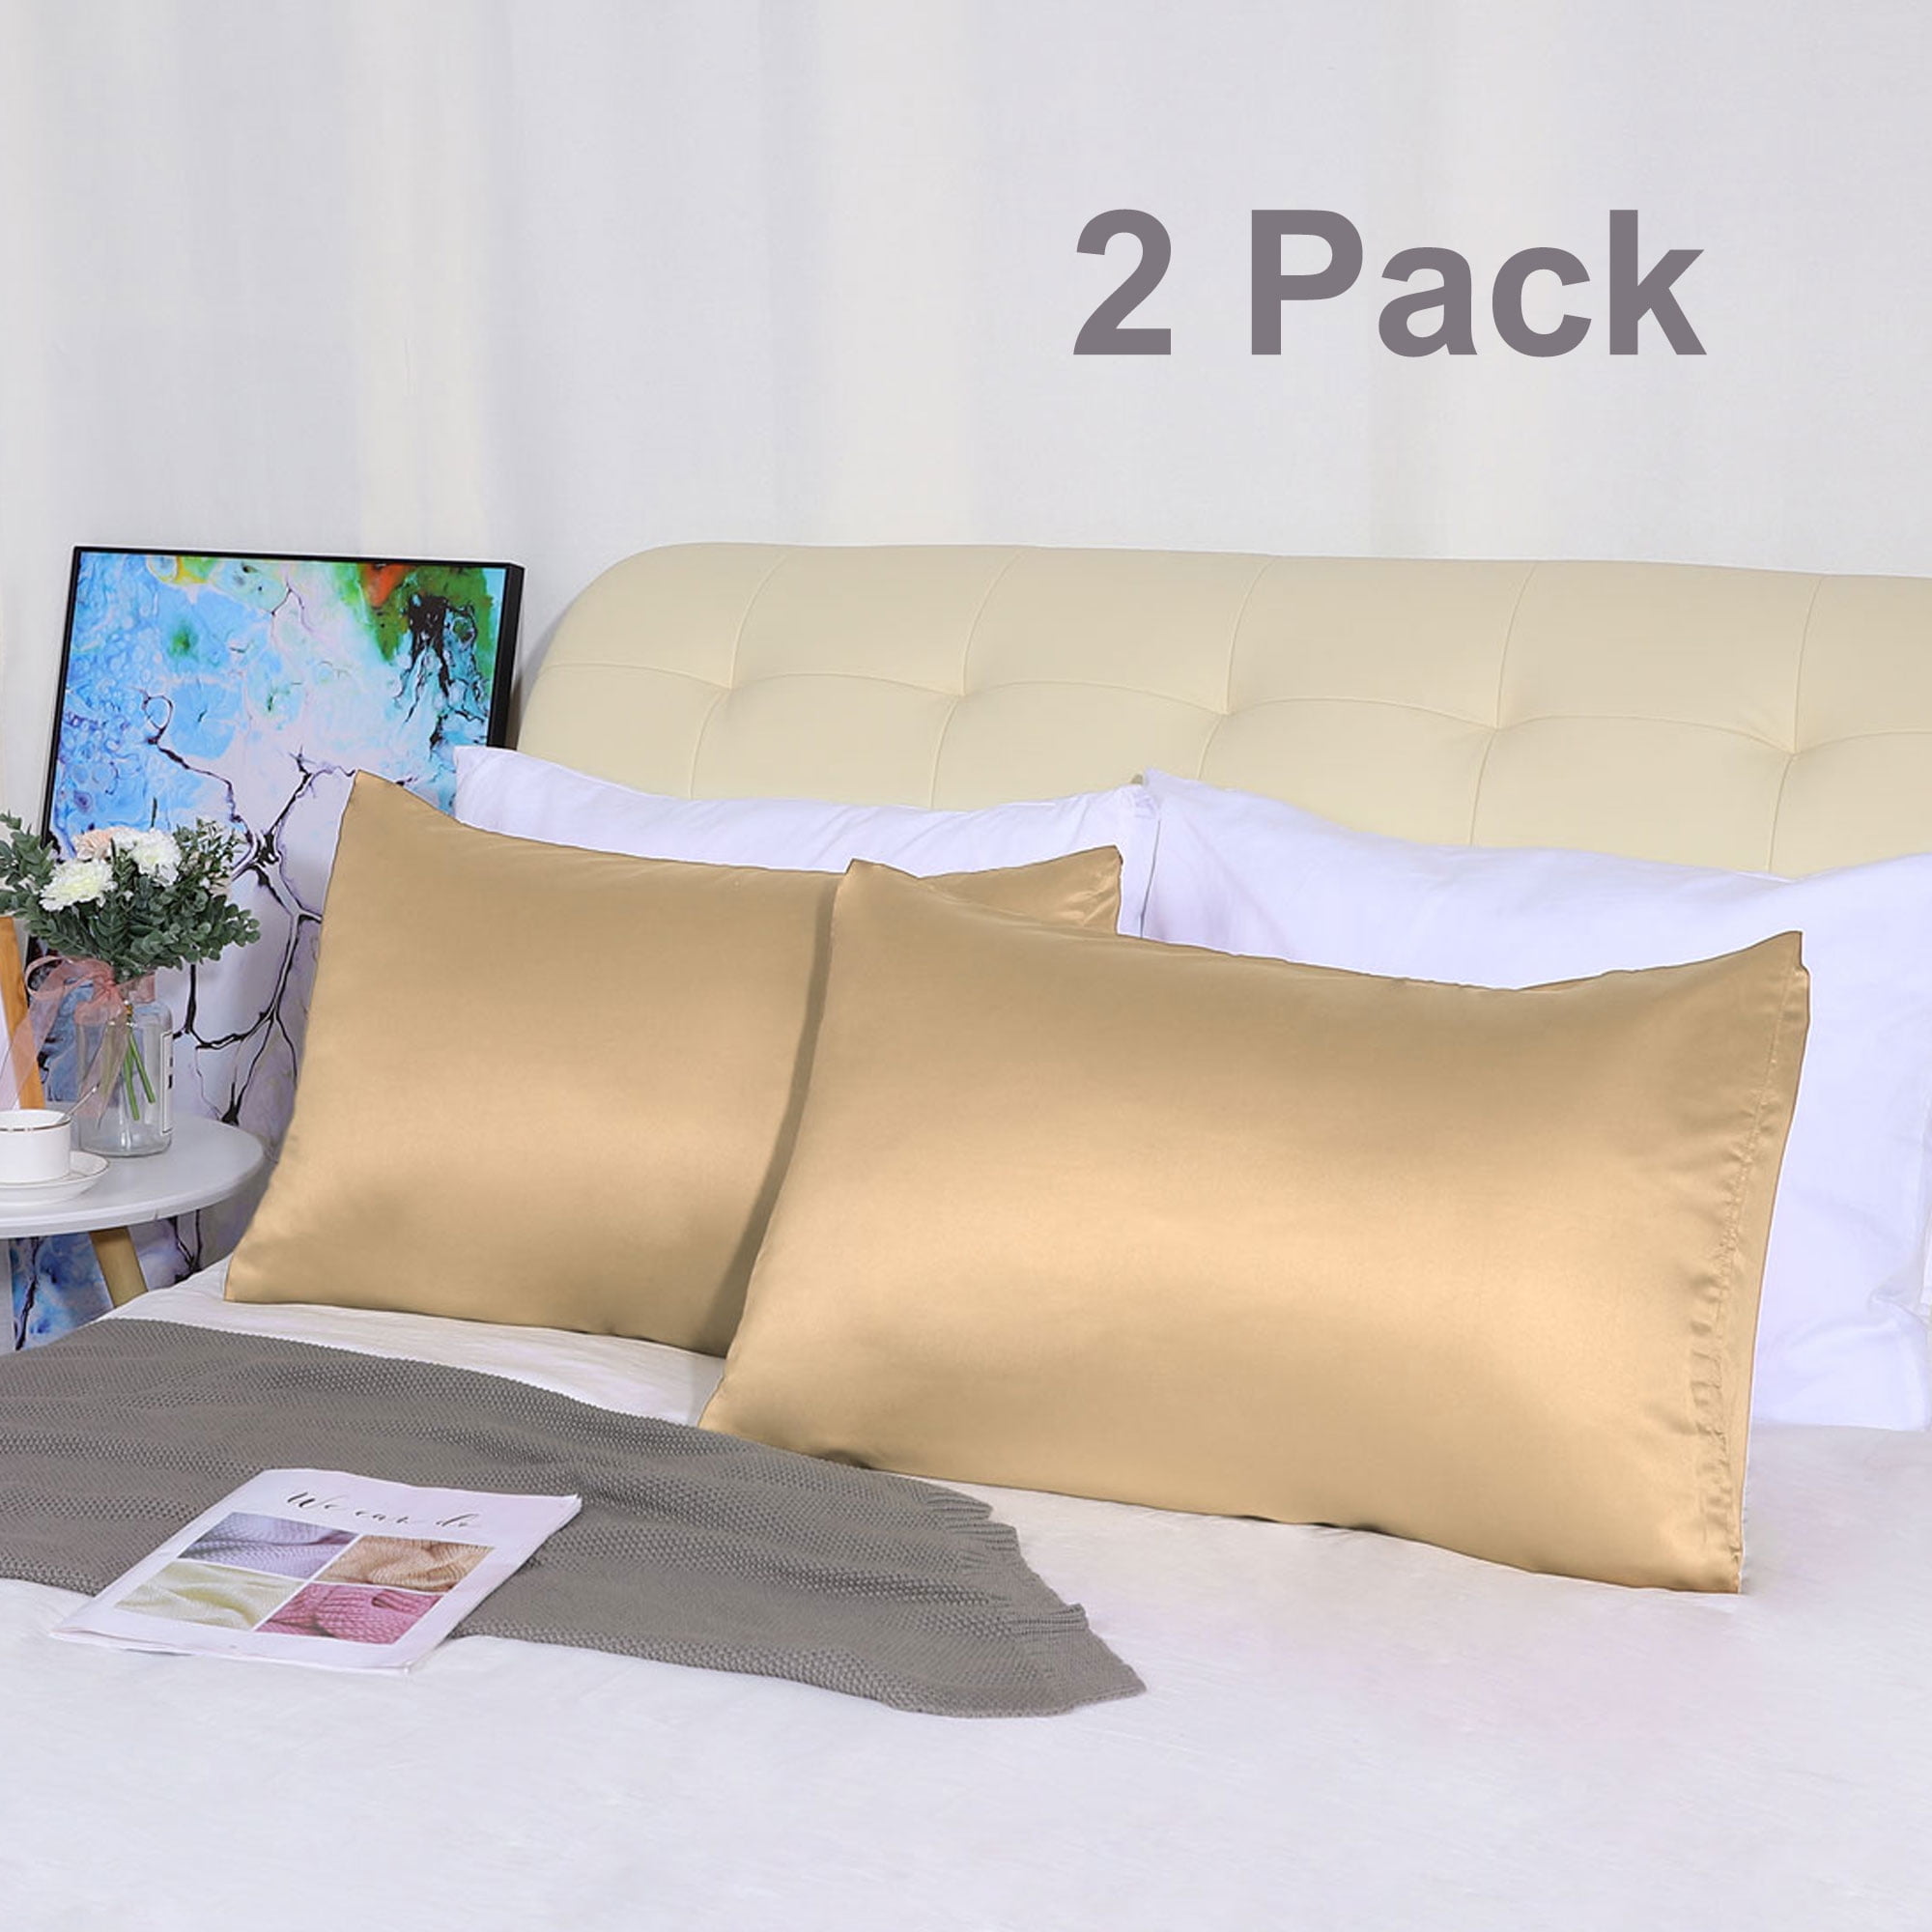 Satin Pillowcase Standard Size 20 x 30Inches Winter Stars Floral Soft Anti-Wrinkle Non-Fade Stain Resistant with Envelope Closure Pillow Cover for Couch Bedroom Office 